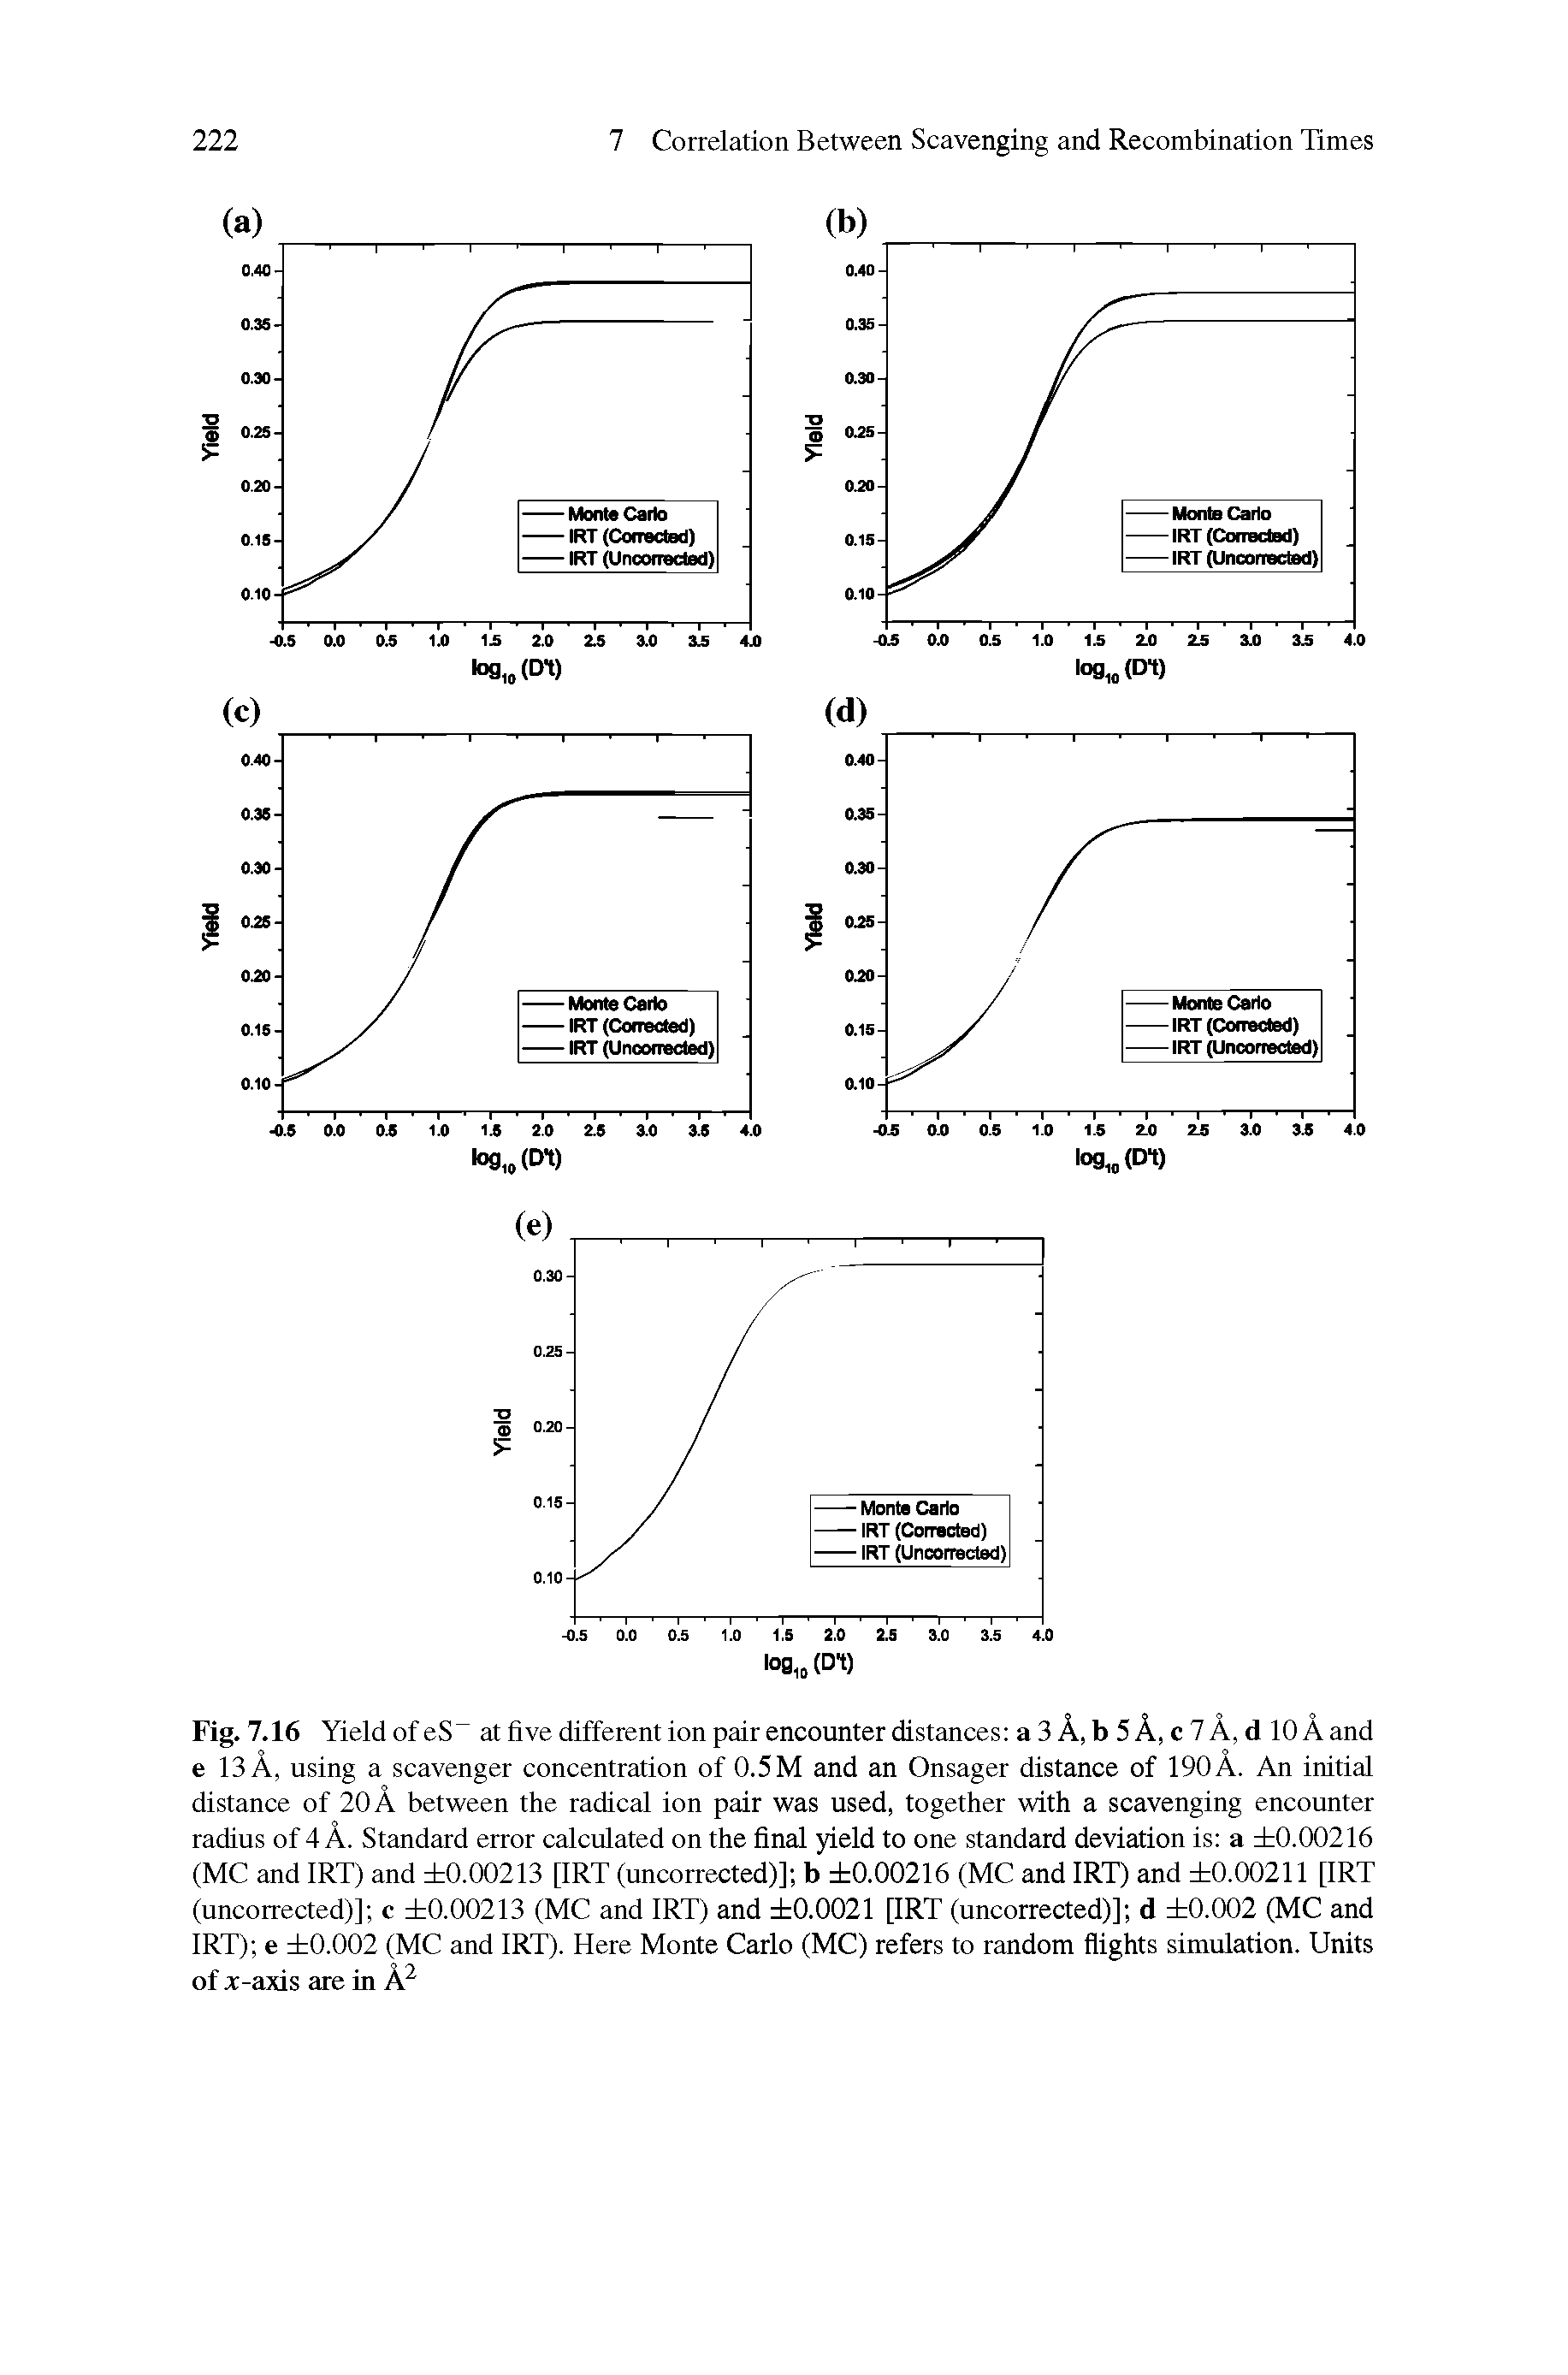 Fig. 7.16 Yield of eS at five different ion pair encounter distances a 3 A, b 5 A, c 7 A, d 10 A and e 13 A, using a scavenger concentration of 0.5M and an Onsager distance of 190A. An initial distance of 20 A between the radical ion pair was used, together with a scavenging encounter radius of 4 A. Standard error calculated on the final yield to one standard deviation is a 0.00216 (MC and IRT) and 0.00213 [IRT (uncorrected)] b 0.00216 (MC and IRT) and 0.00211 [IRT (uncorrected)] c 0.00213 (MC and IRT) and 0.0021 [IRT (uncorrected)] d 0.002 (MC and IRT) e 0.002 (MC and IRT). Here Monte Carlo (MC) refers to random flights simulation. Units of x-axis are in A ...